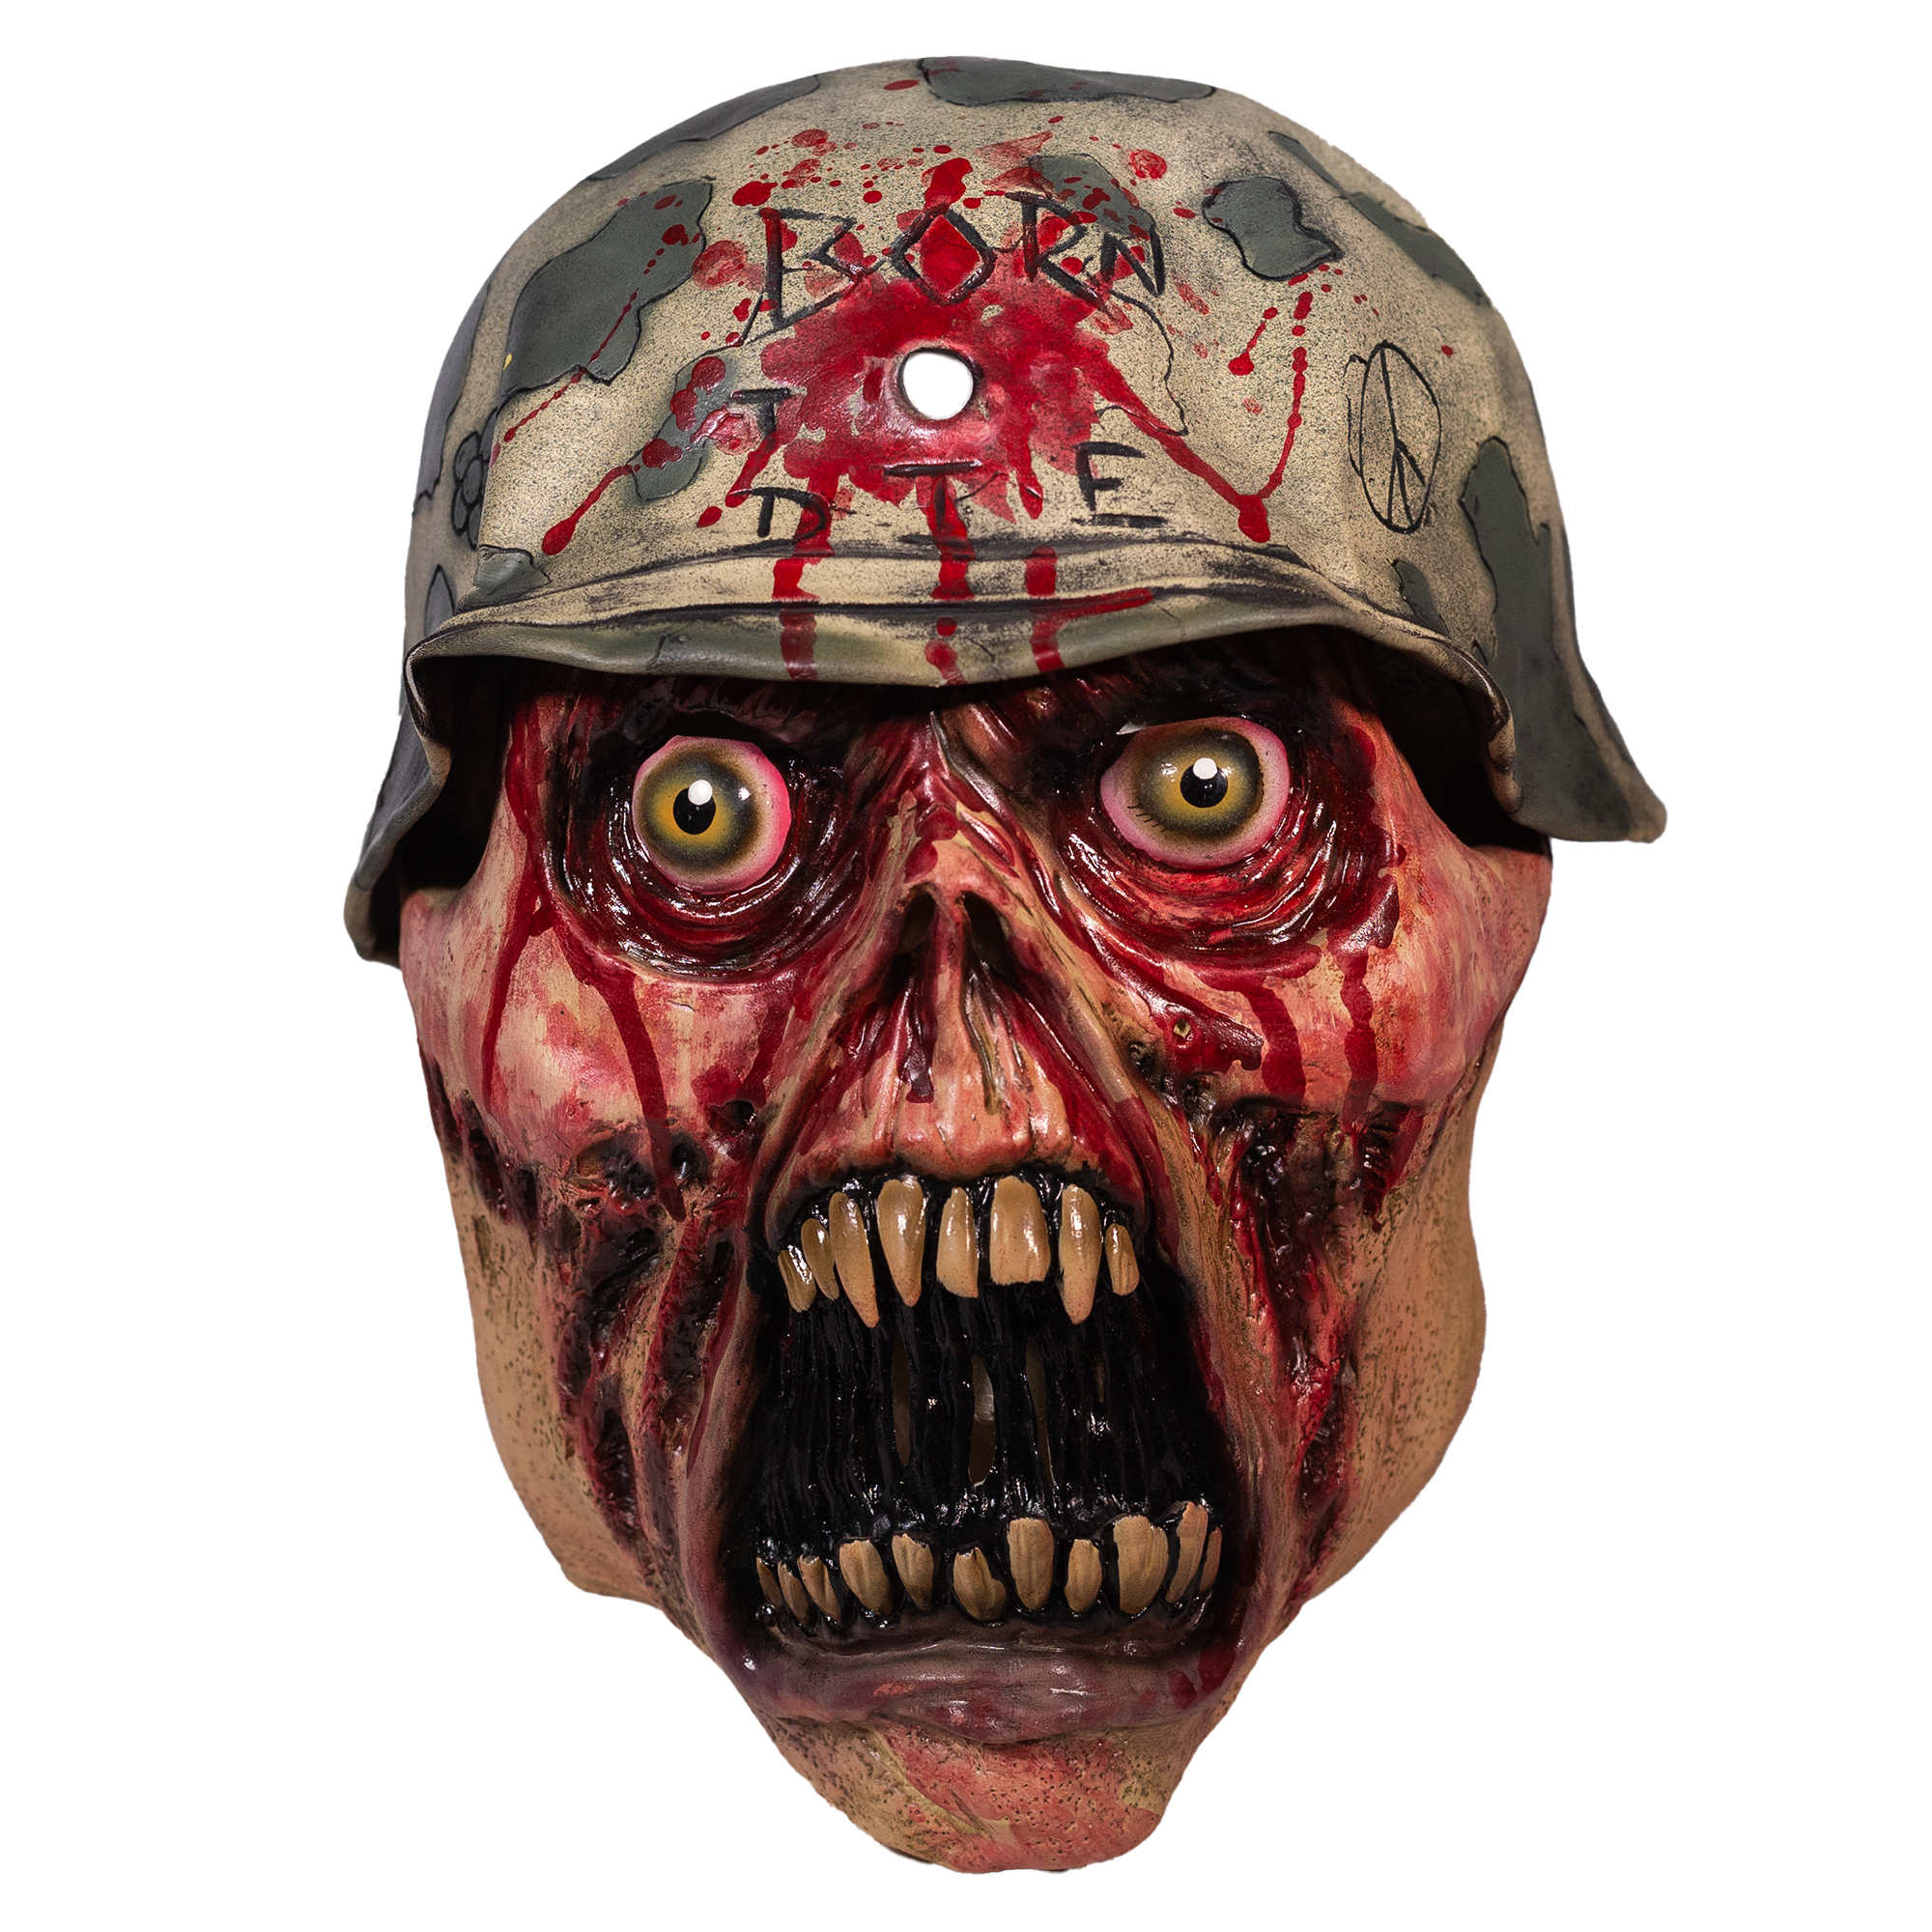 Born To Die | Soldier Zombie and Video Game Mask